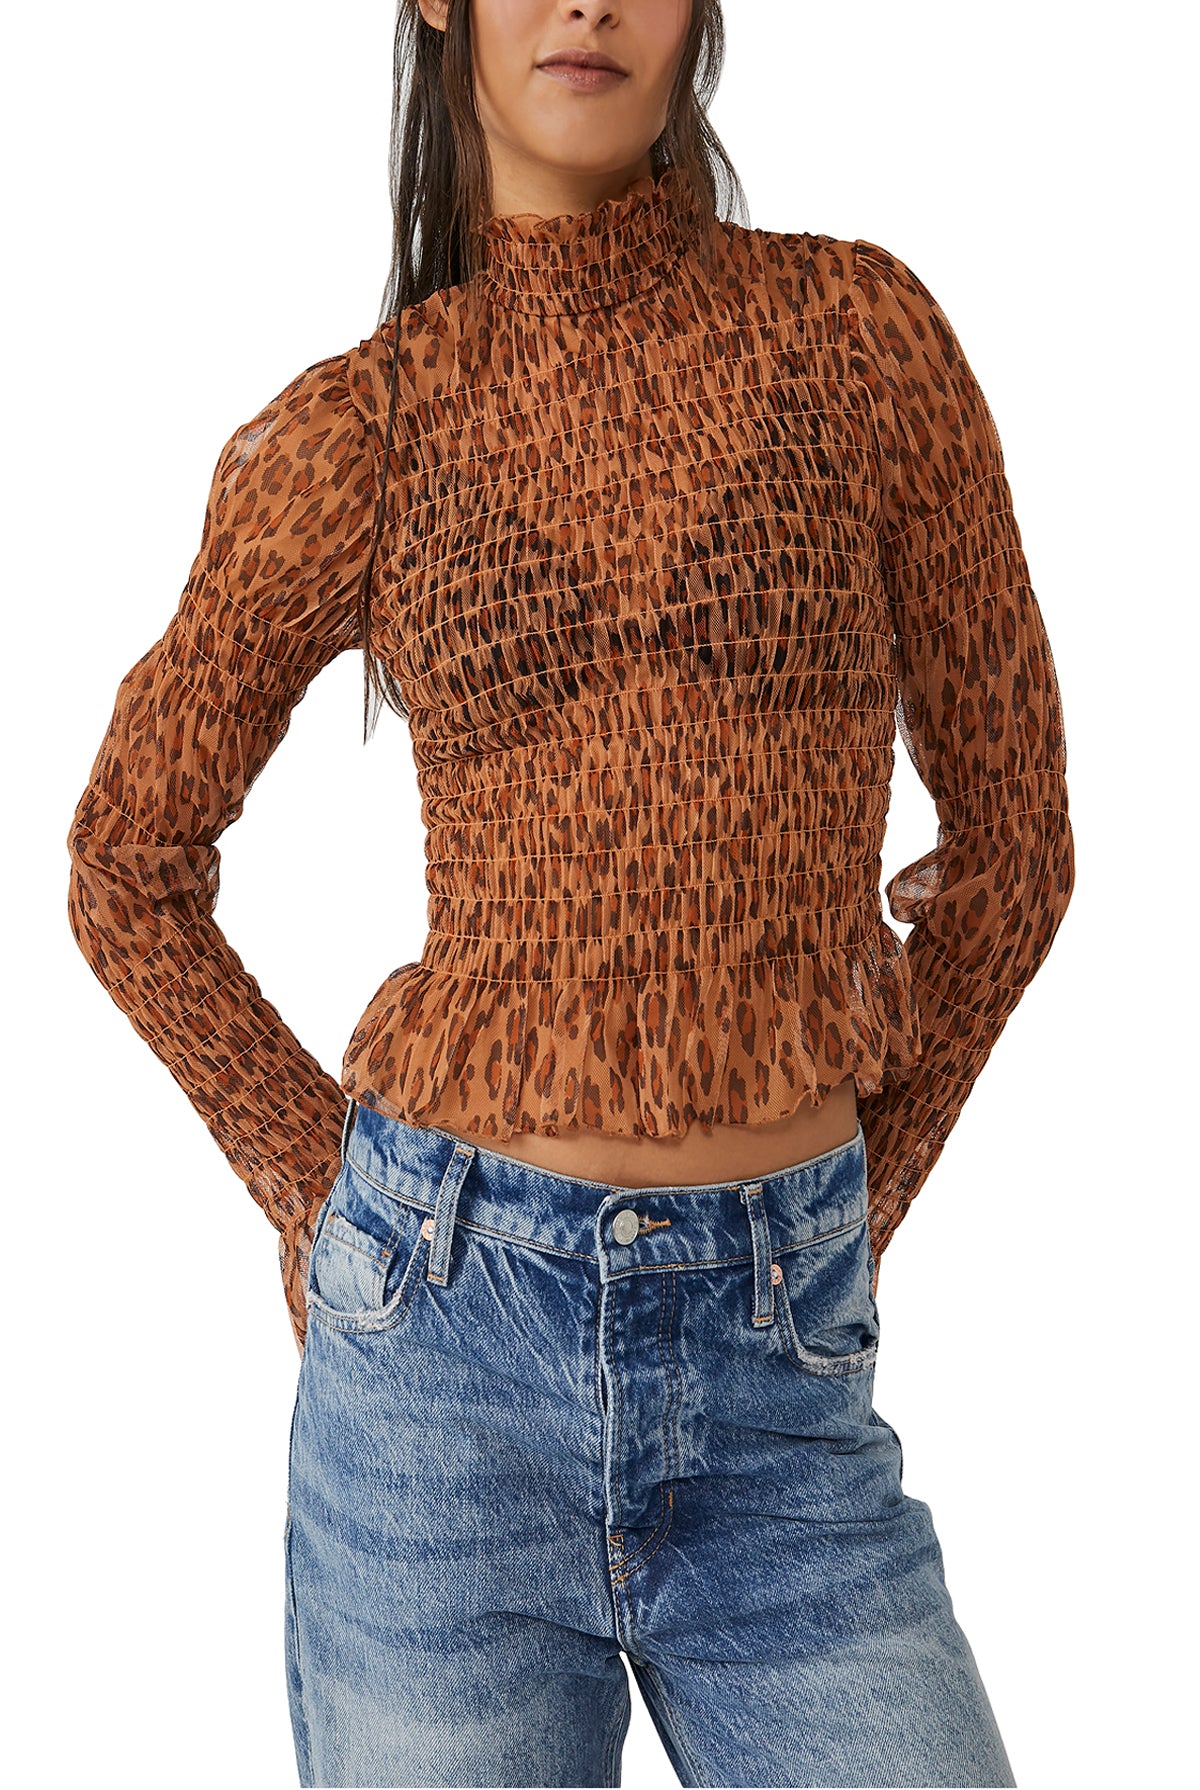 Free People Hello There Top - L LEOPARD COMBO